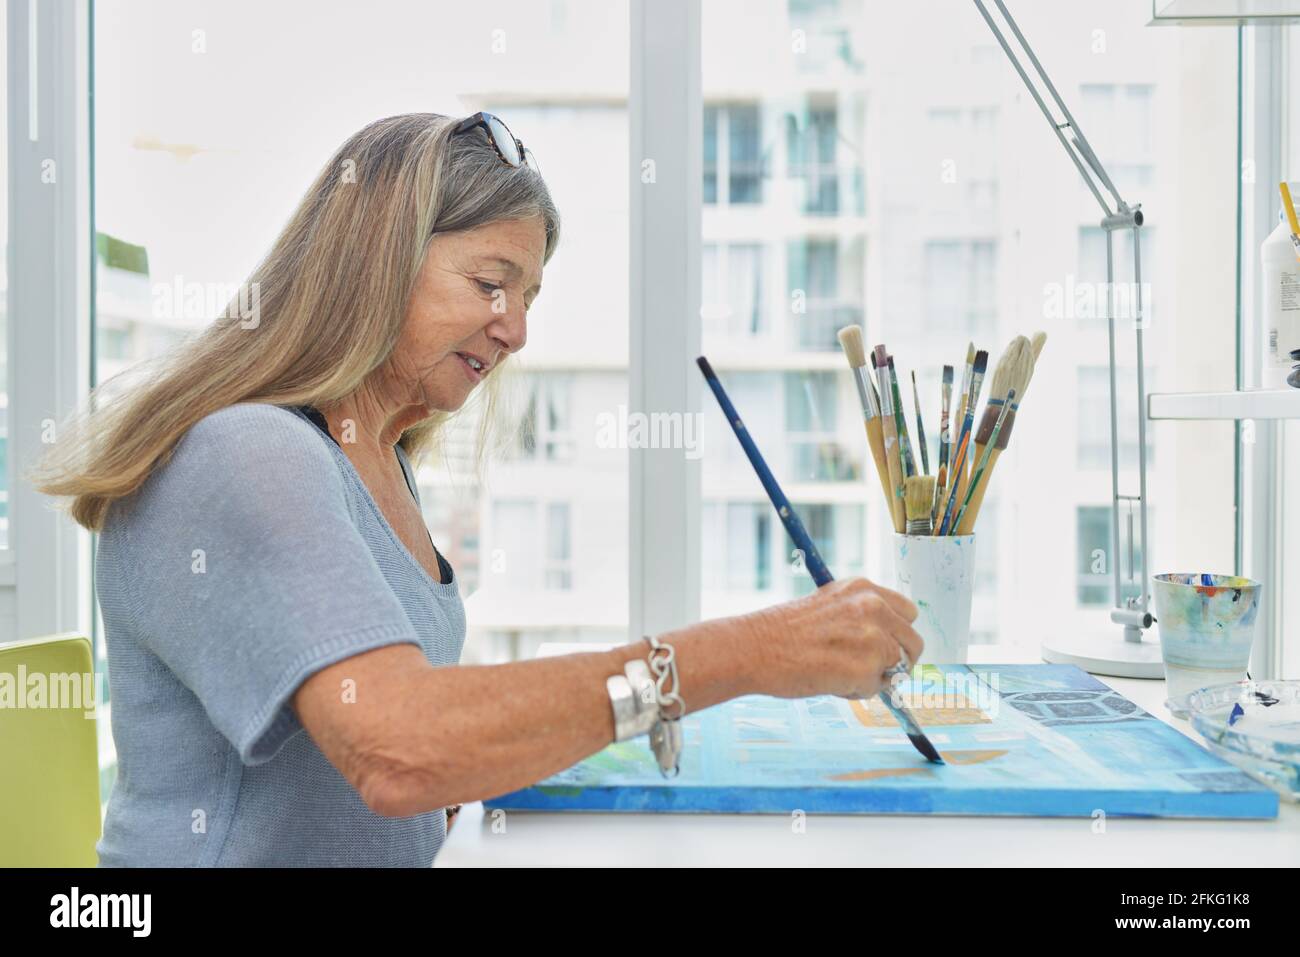 Attractive senior woman painting at desk Stock Photo